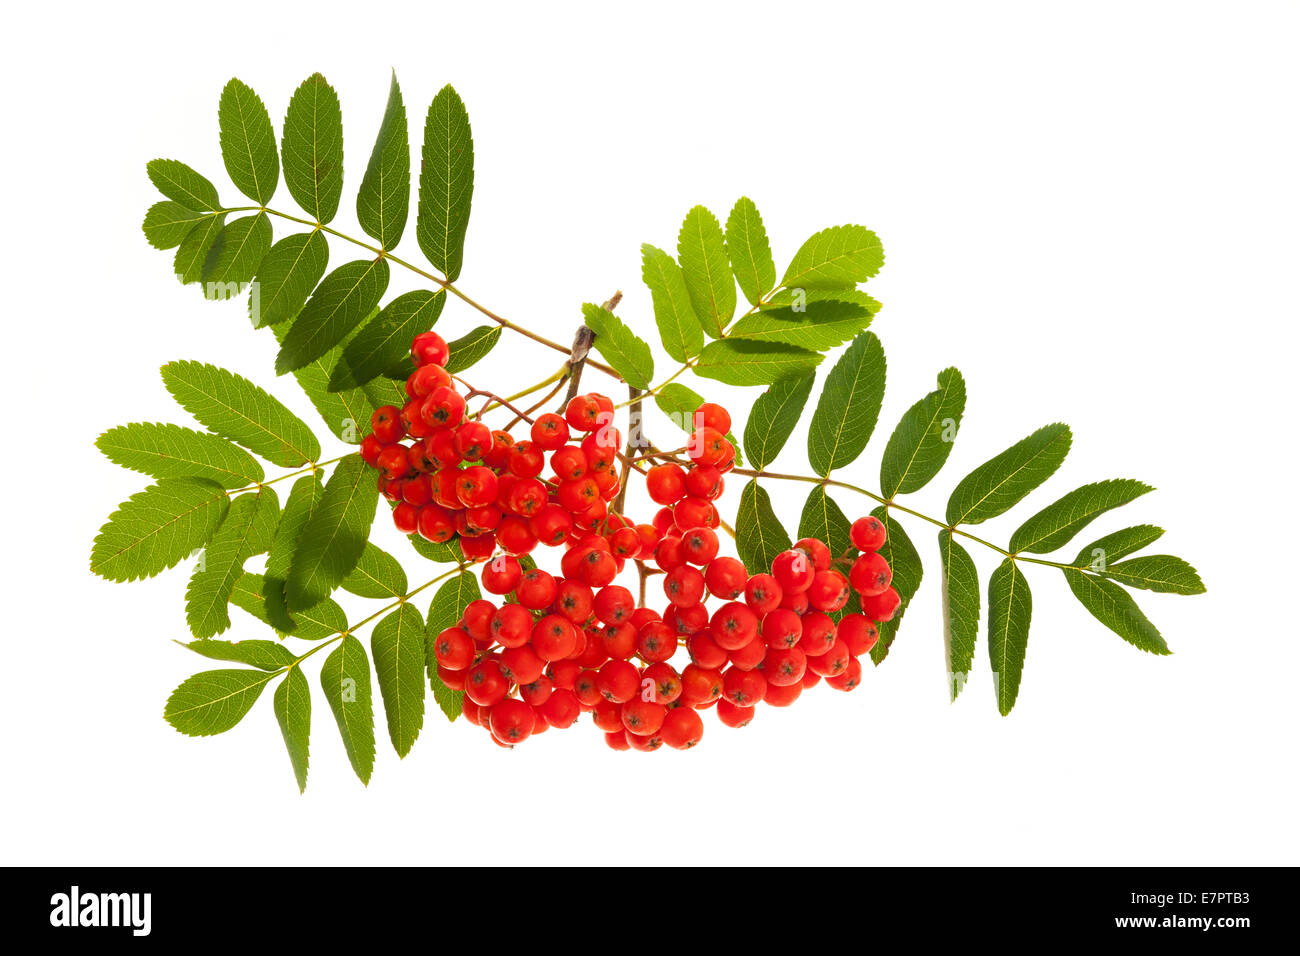 Bunch of red mountain ash or rowan berries with green leaves isolated ...